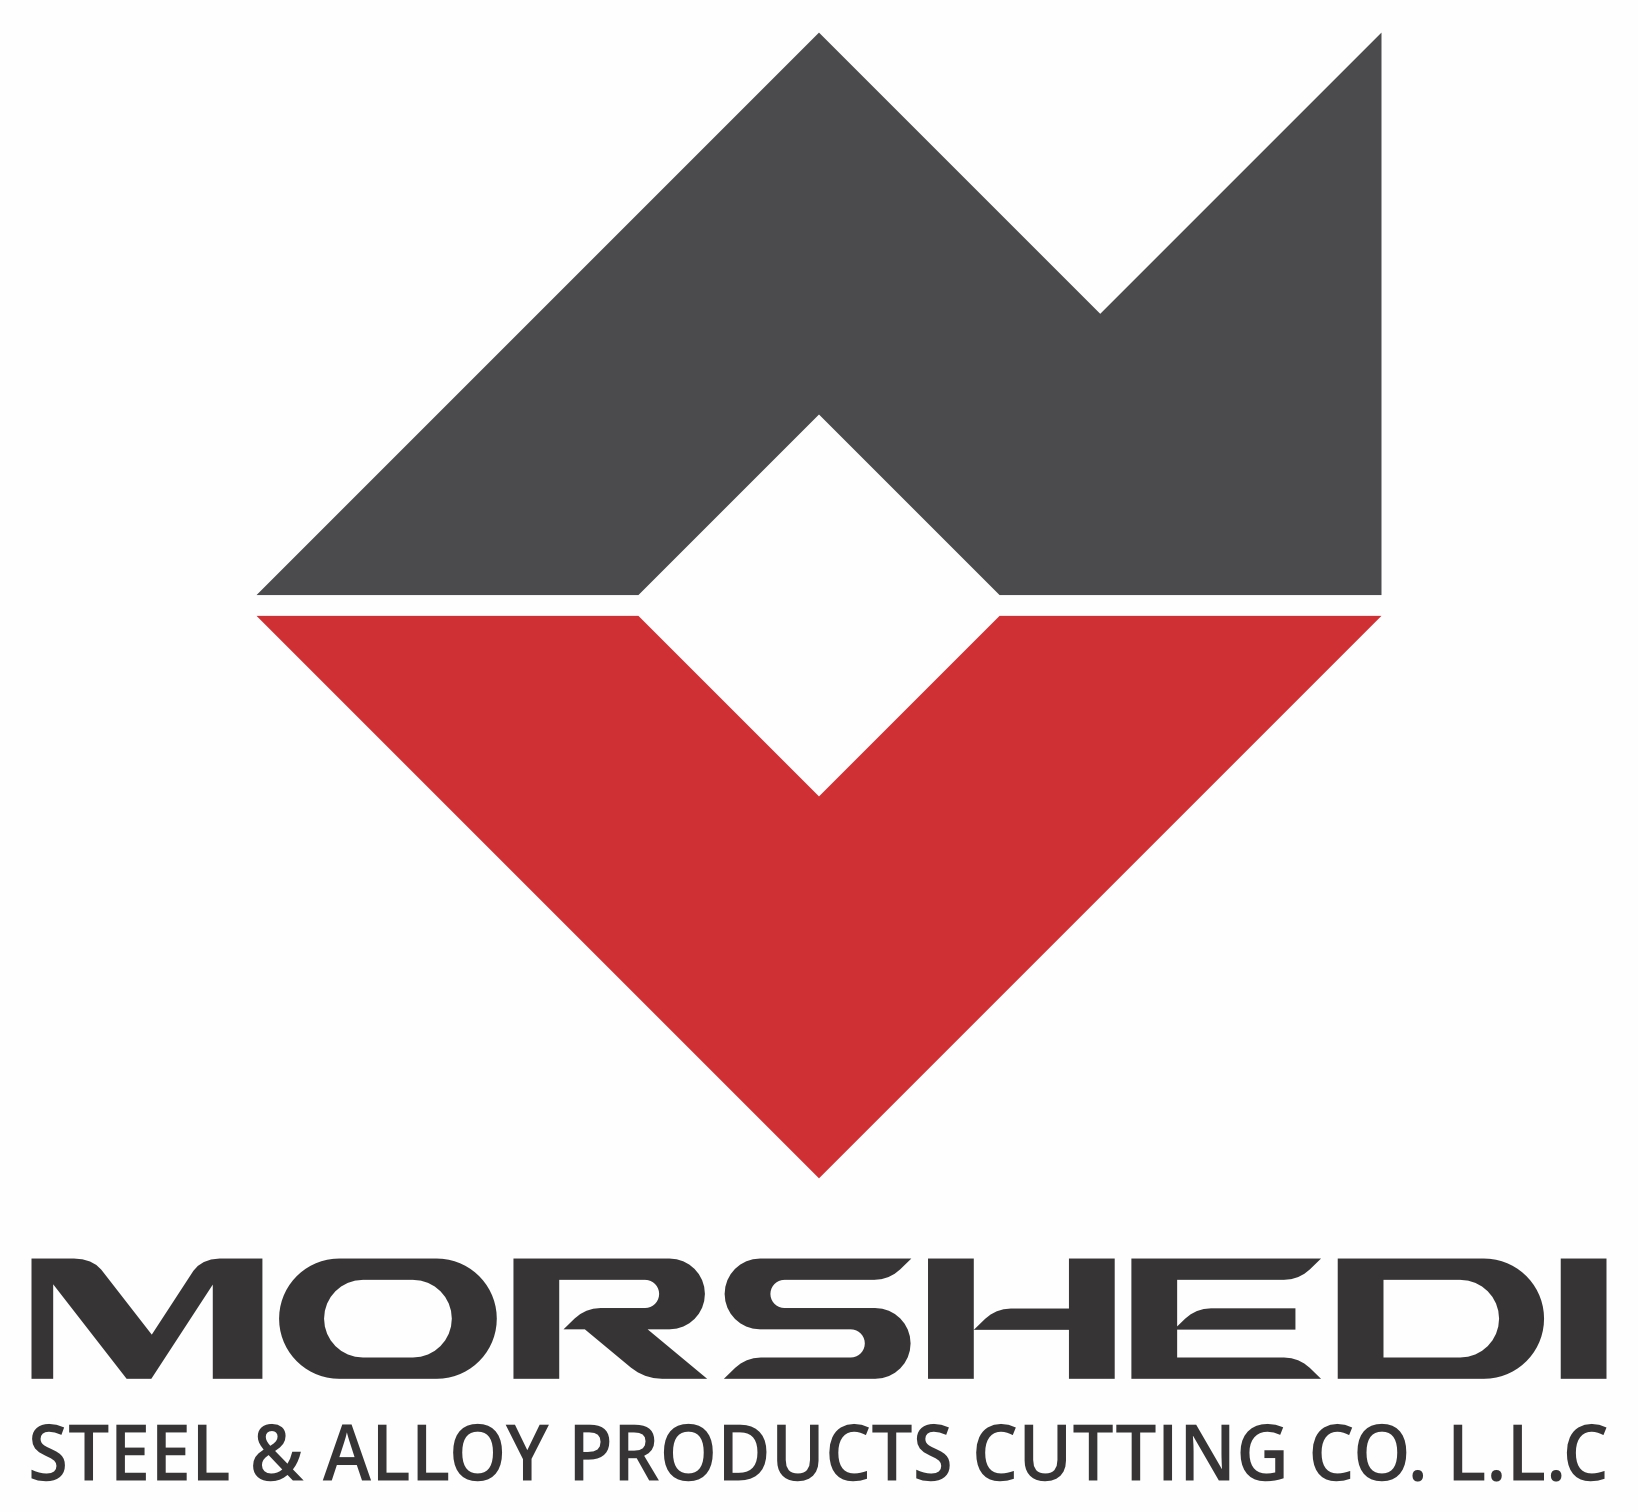 Morshedi Steel & Alloy Products Cutting Co